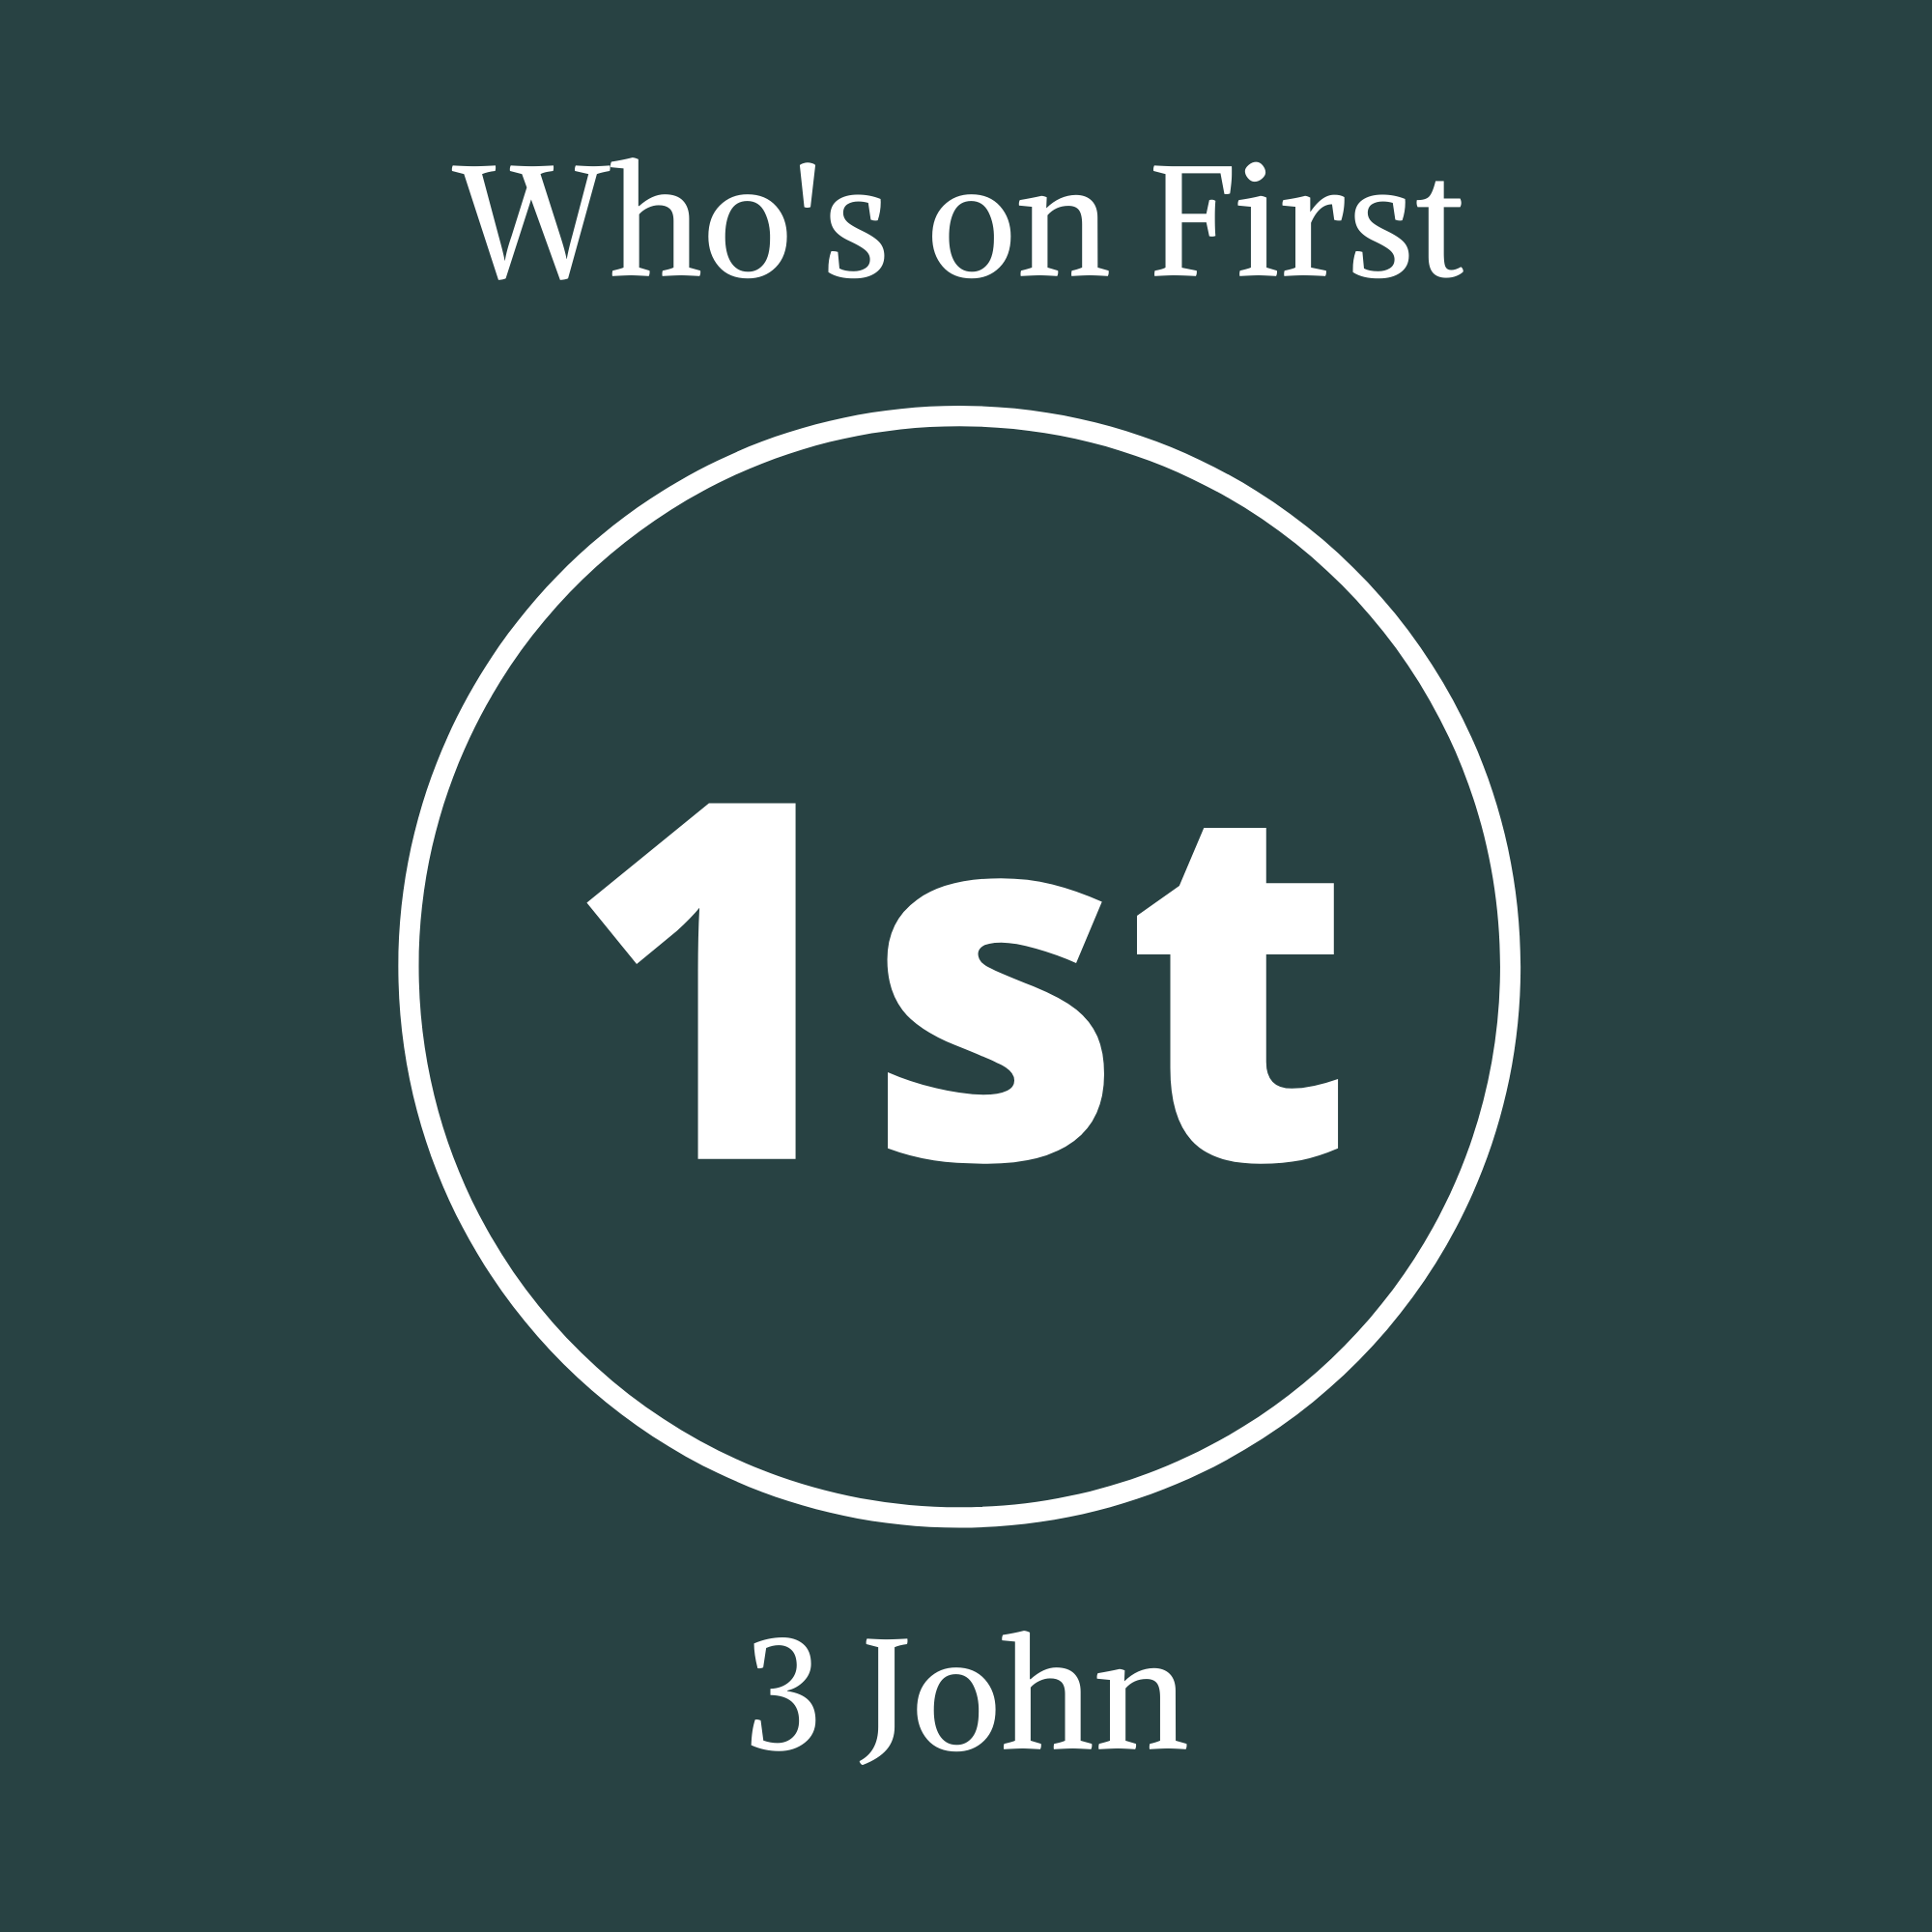 3 John - Who's on First